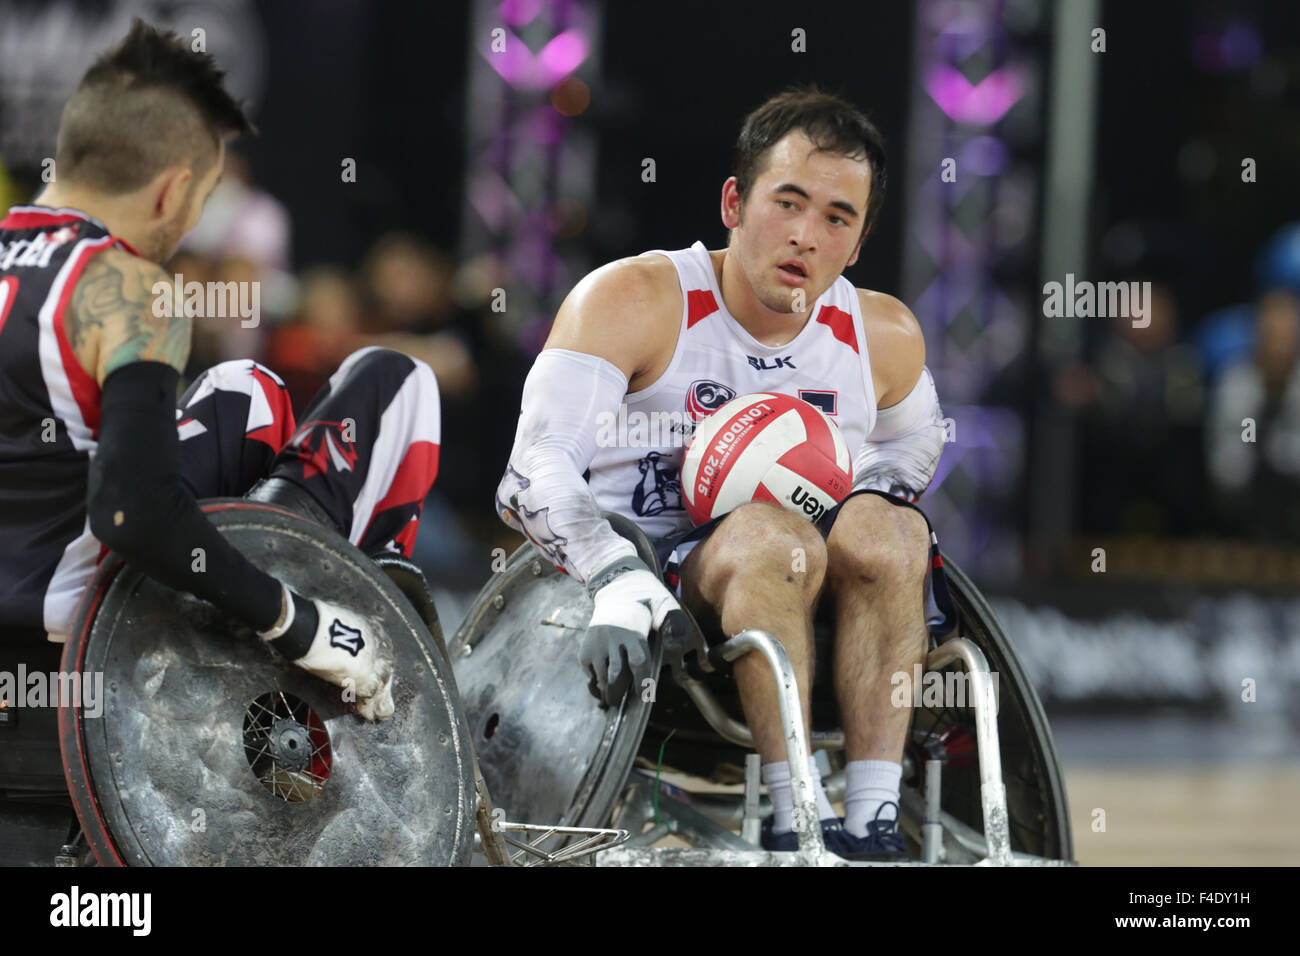 London, UK. 16th October, 2015. World Wheelchair Rugby Challenge Final US vs Canada. Canada win gold 54-50.  Copperbox, Olympic Park, London, UK. 16th October 2015. Aoki looks exhausted.Copyright Carol Moir/Alamy Live News. Stock Photo